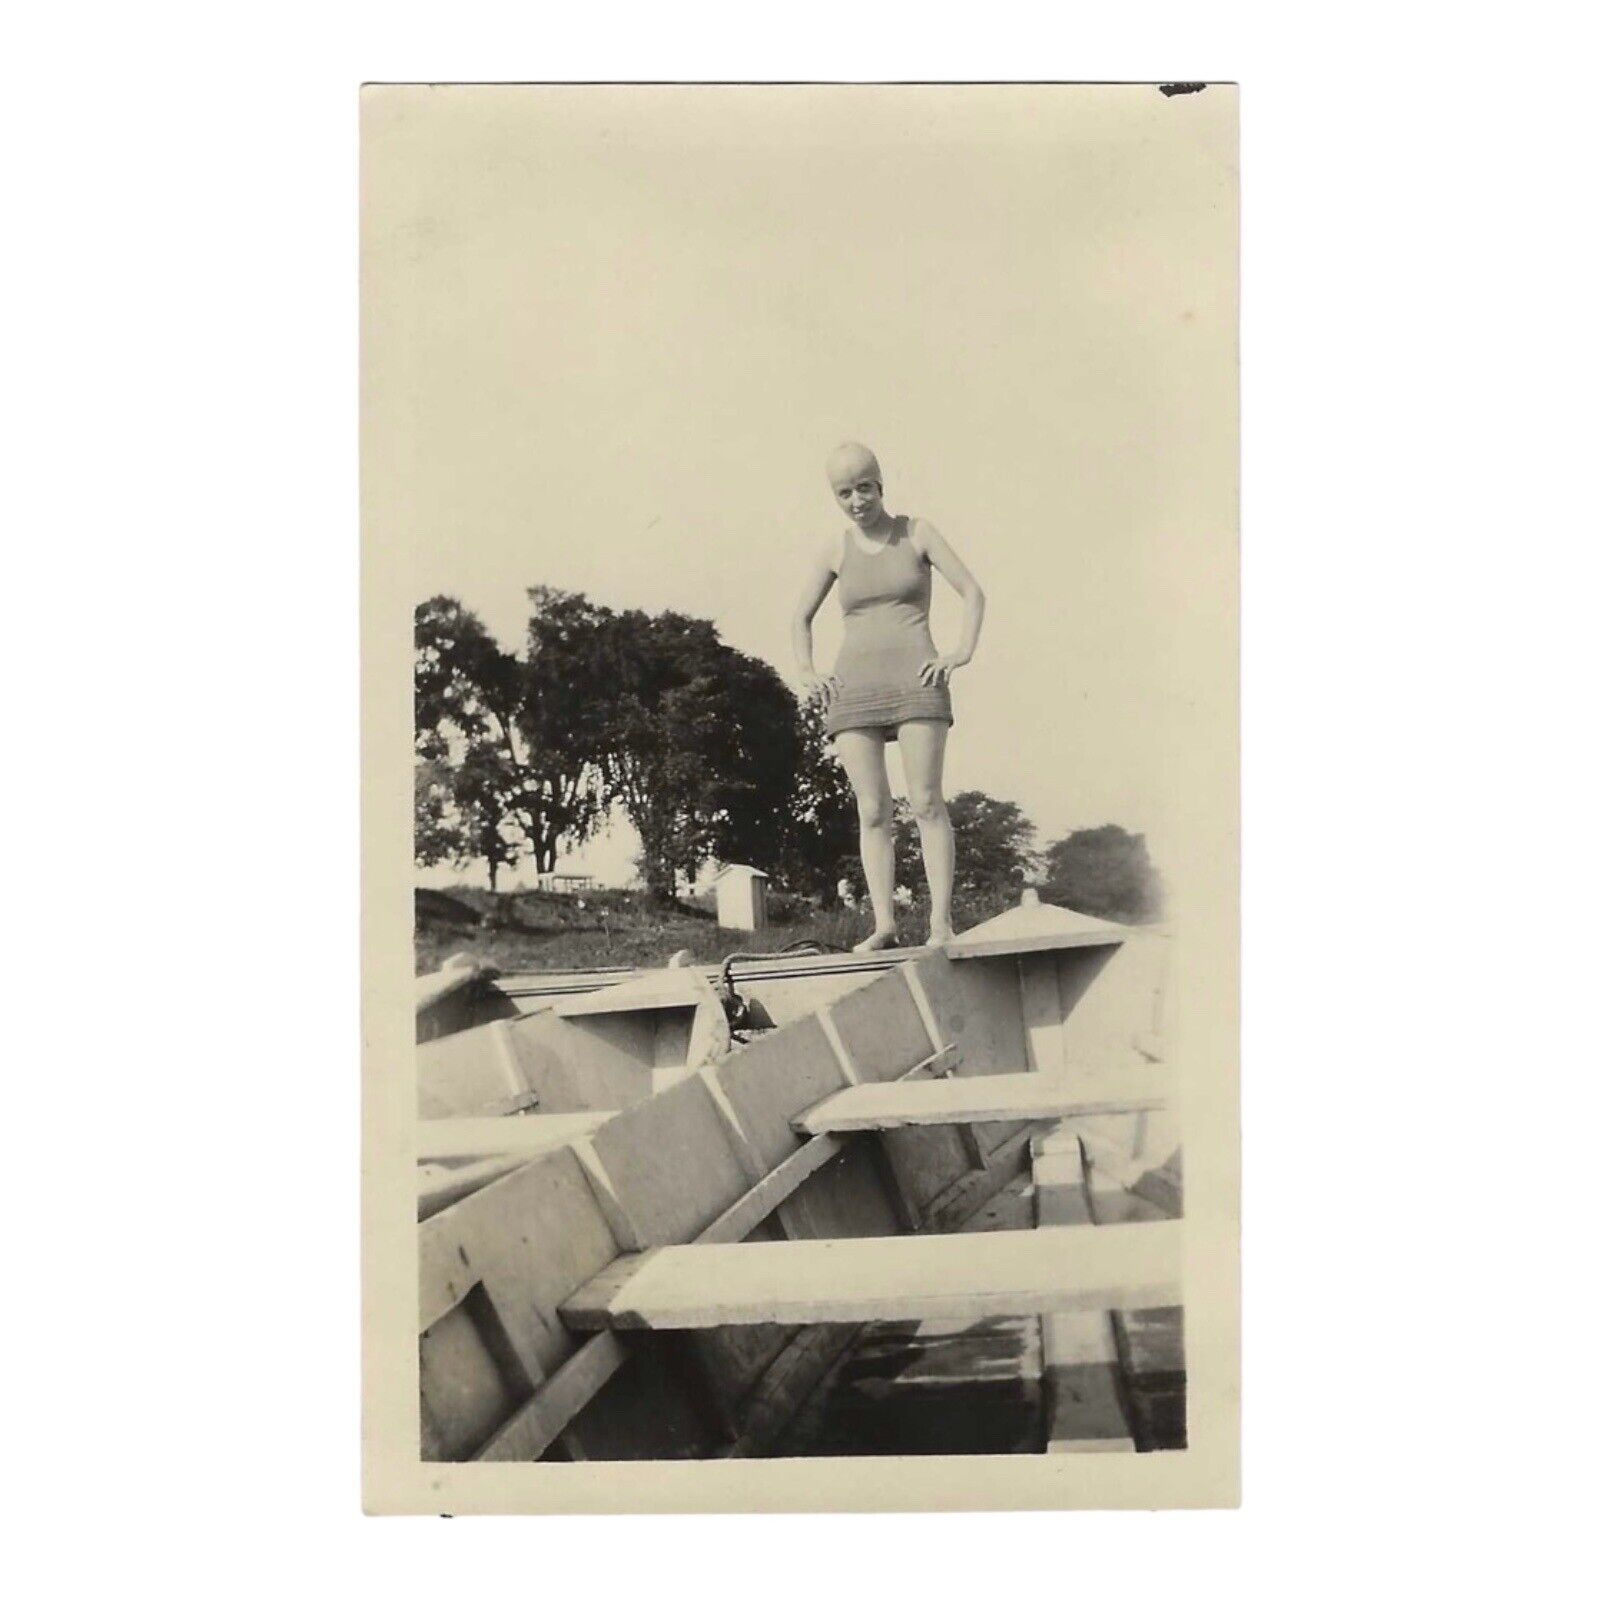 Vintage Snapshot Photo 1920s Woman Hands On Hips Bathing Suit Standing On Boat